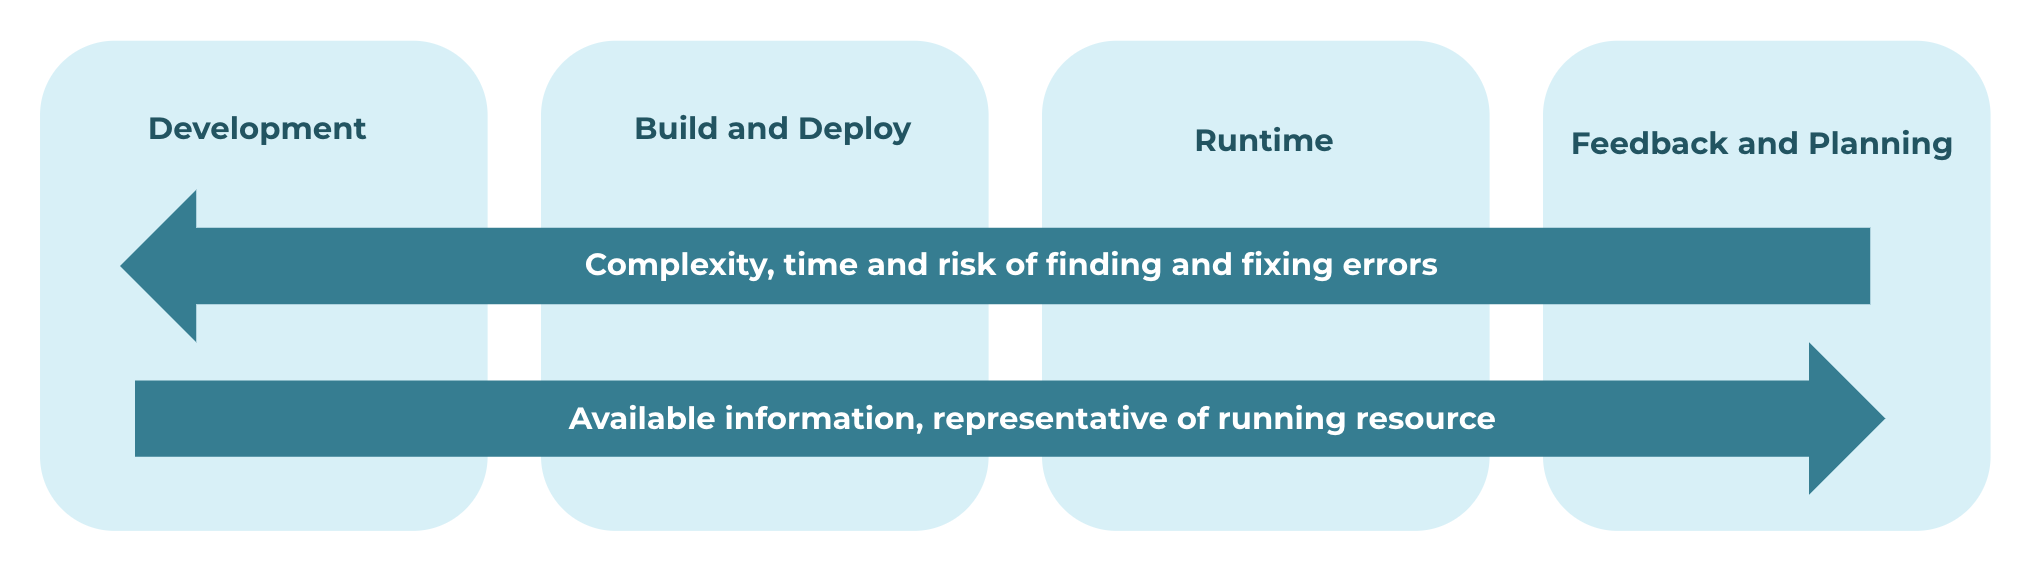 Finding security issues earlier in the DevOps lifecycle is challenging but is also the least time-consuming approach to cloud security.